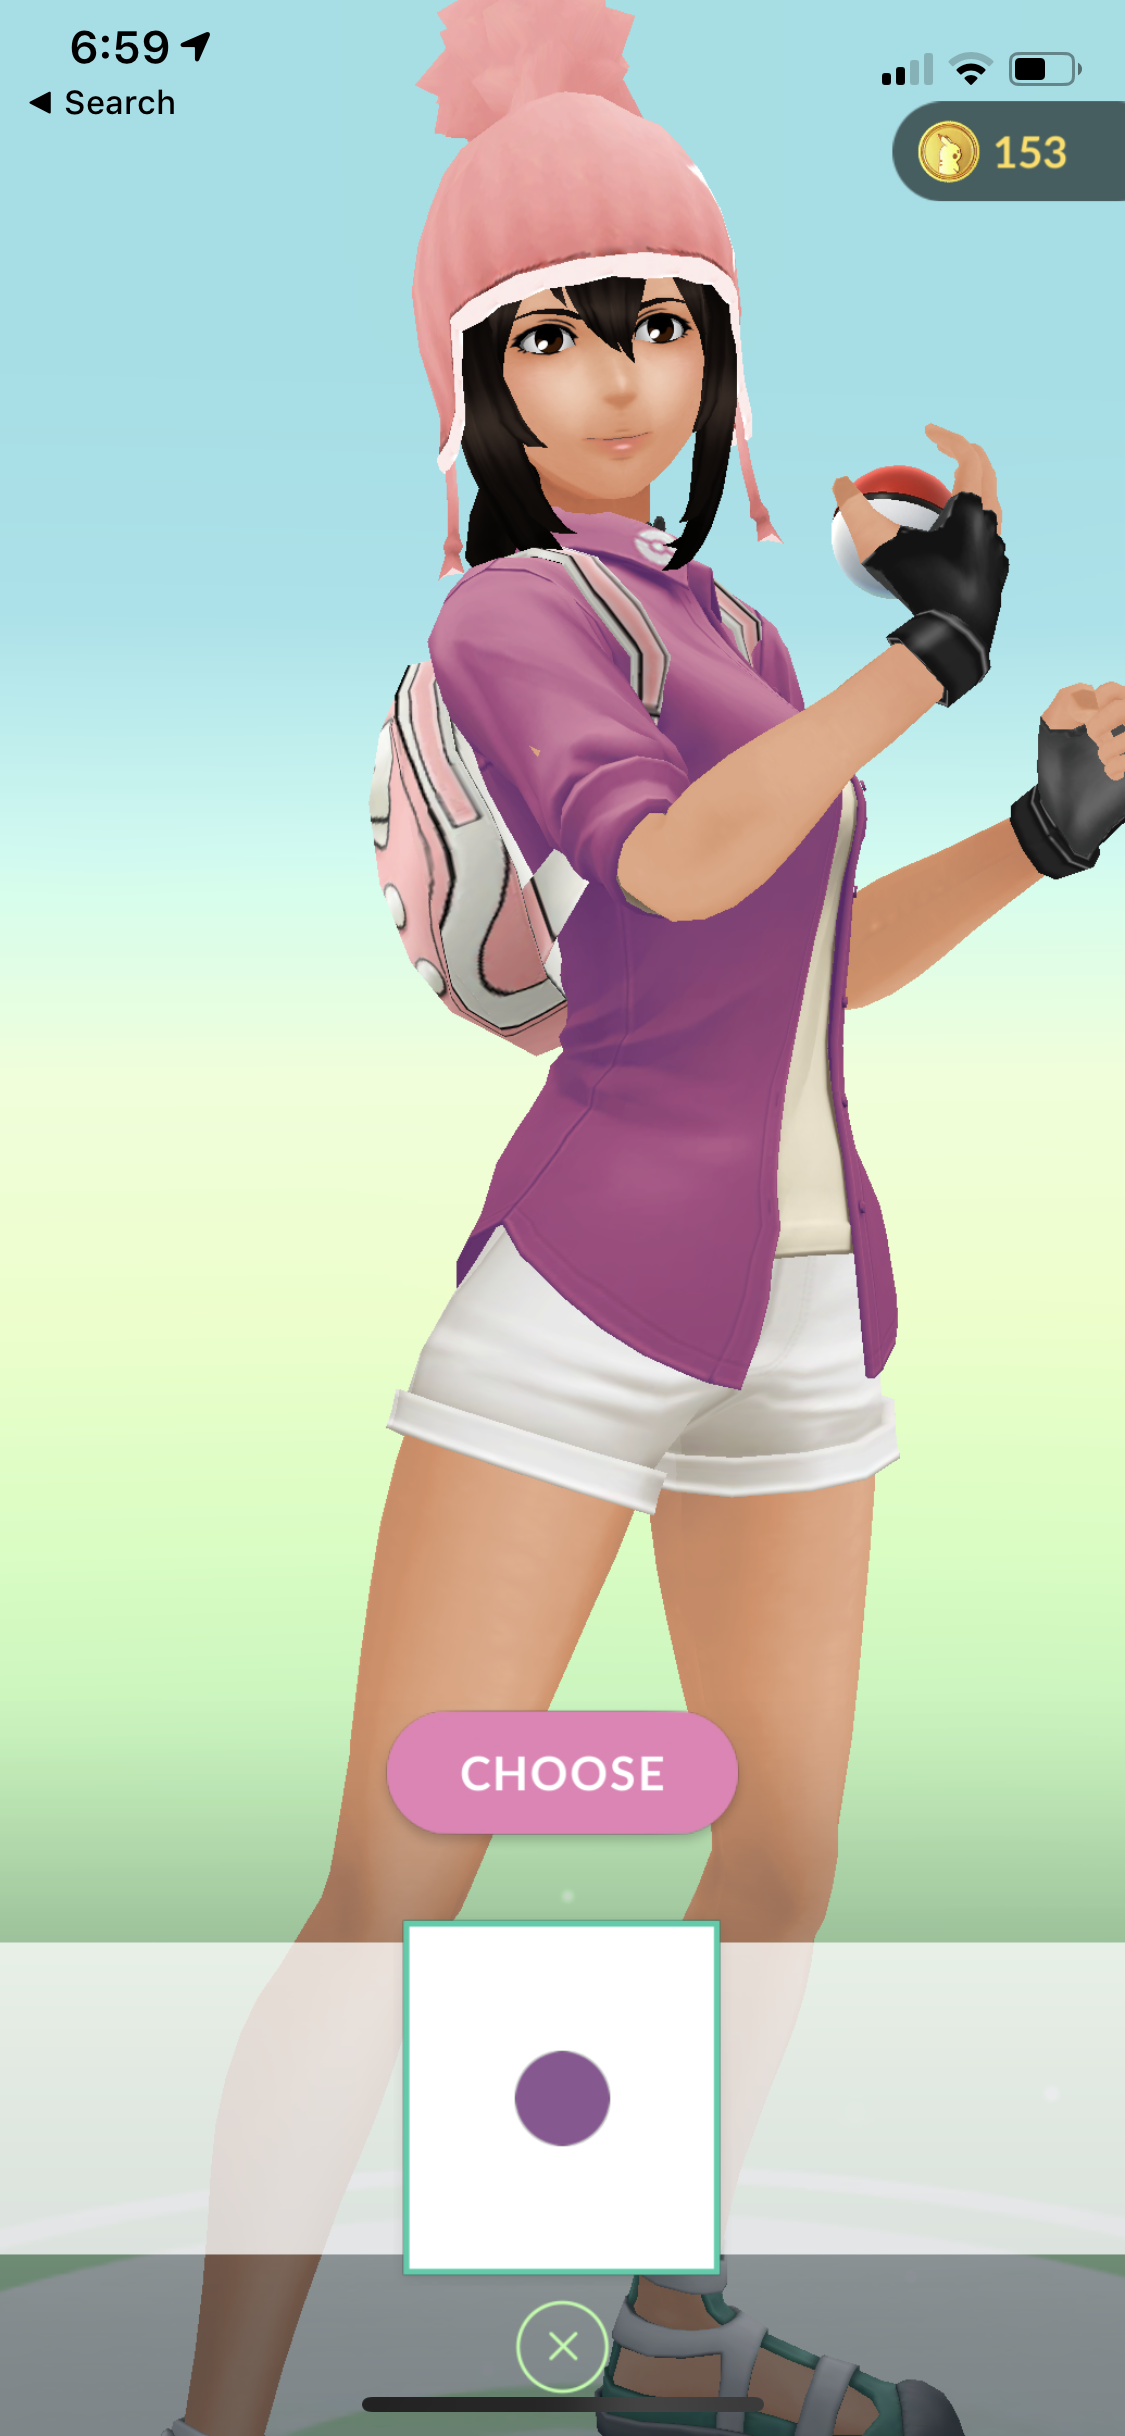 New Free Spring Clothes Available For Your Avatar In Pokemon Go Nintendo Wire